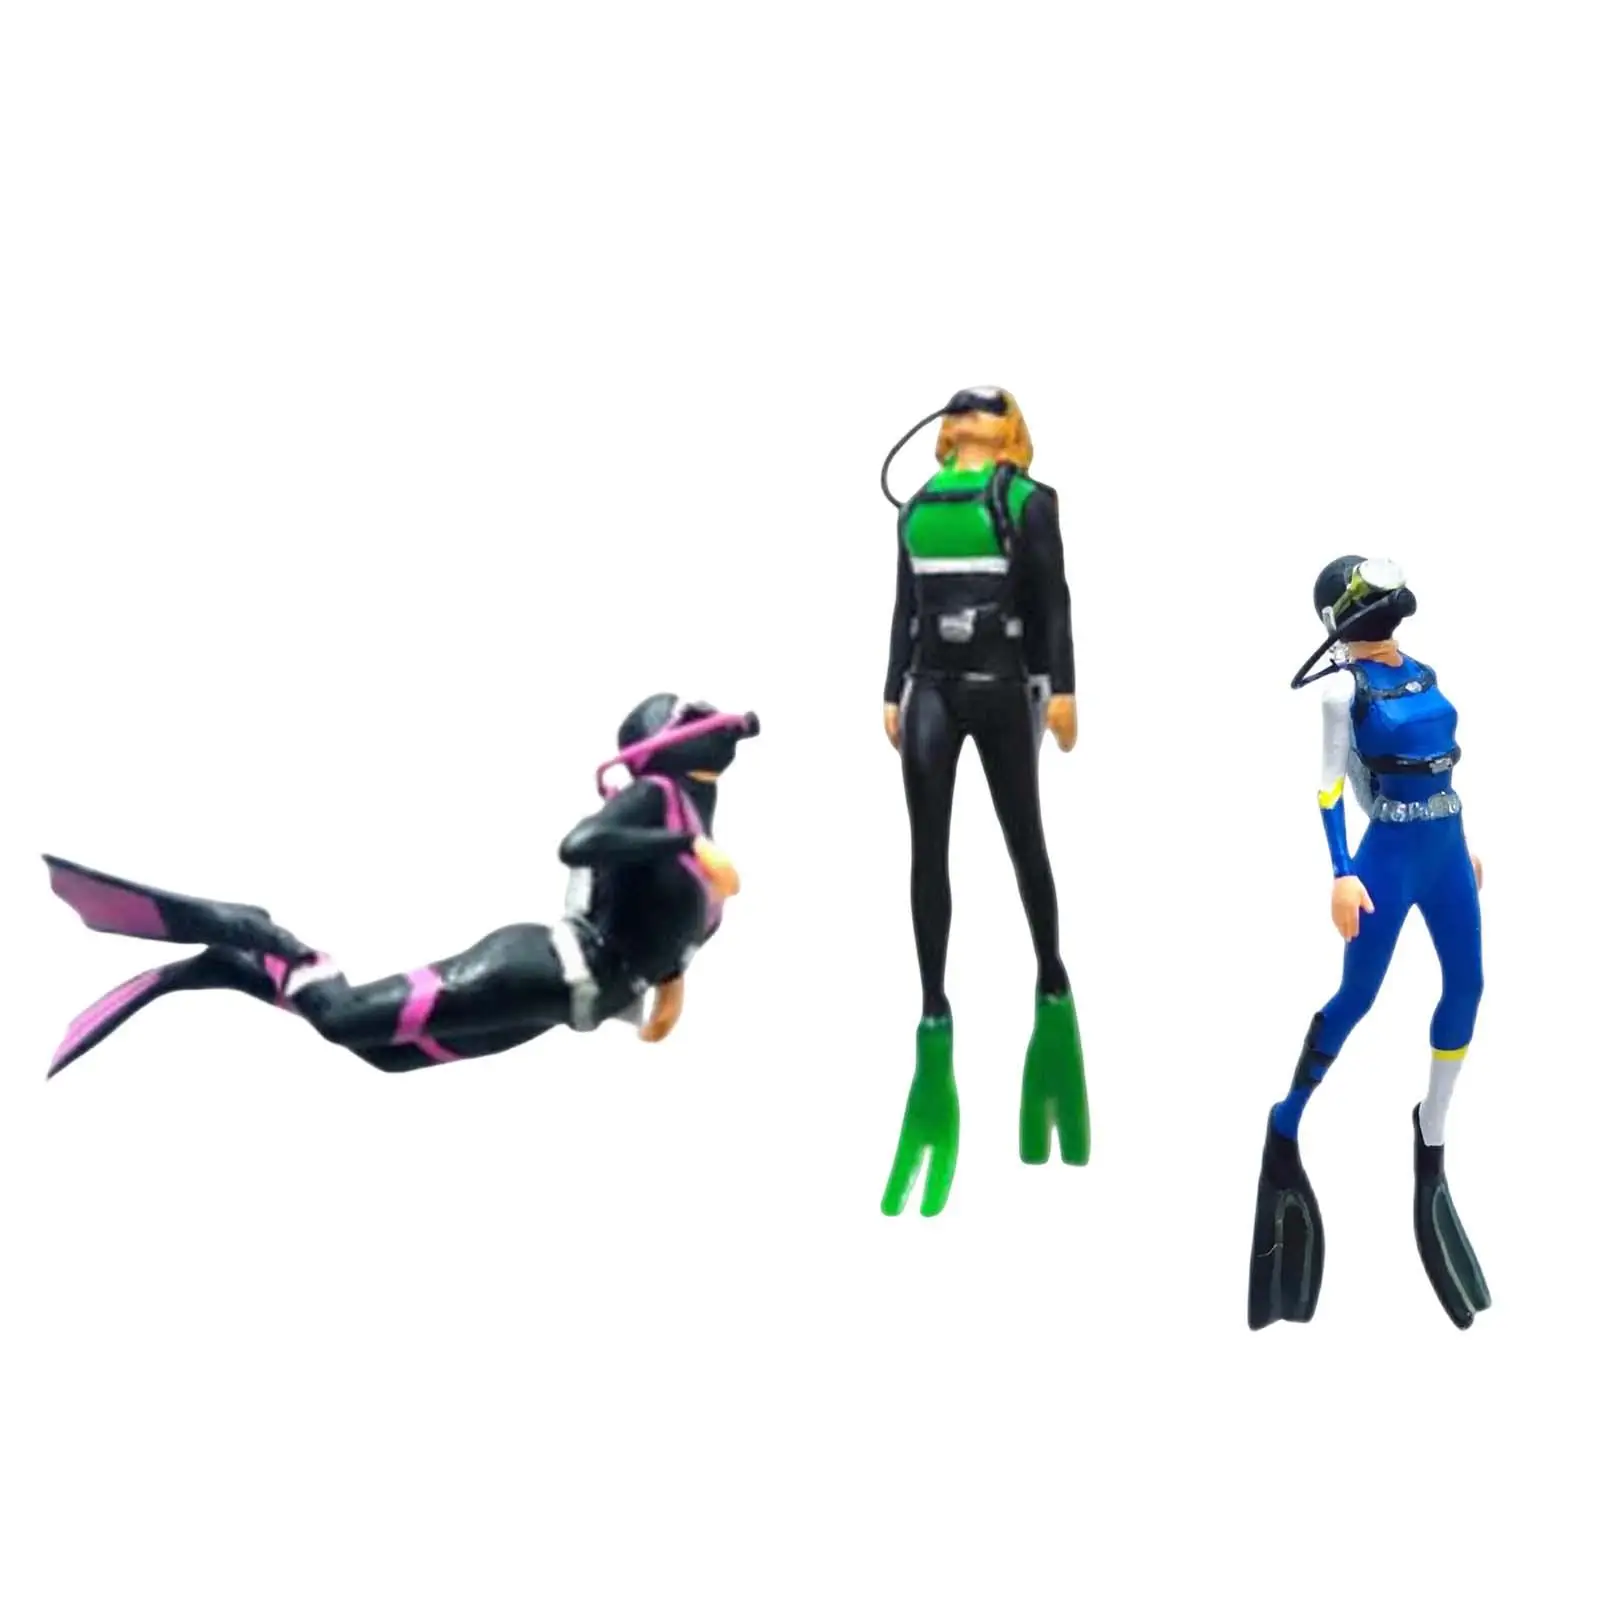 3x 1/64 Diving Figures Movie Props for DIY Projects Decor Miniature Scenes Desktop Ornament Diorama Layout Sand Table Decoration